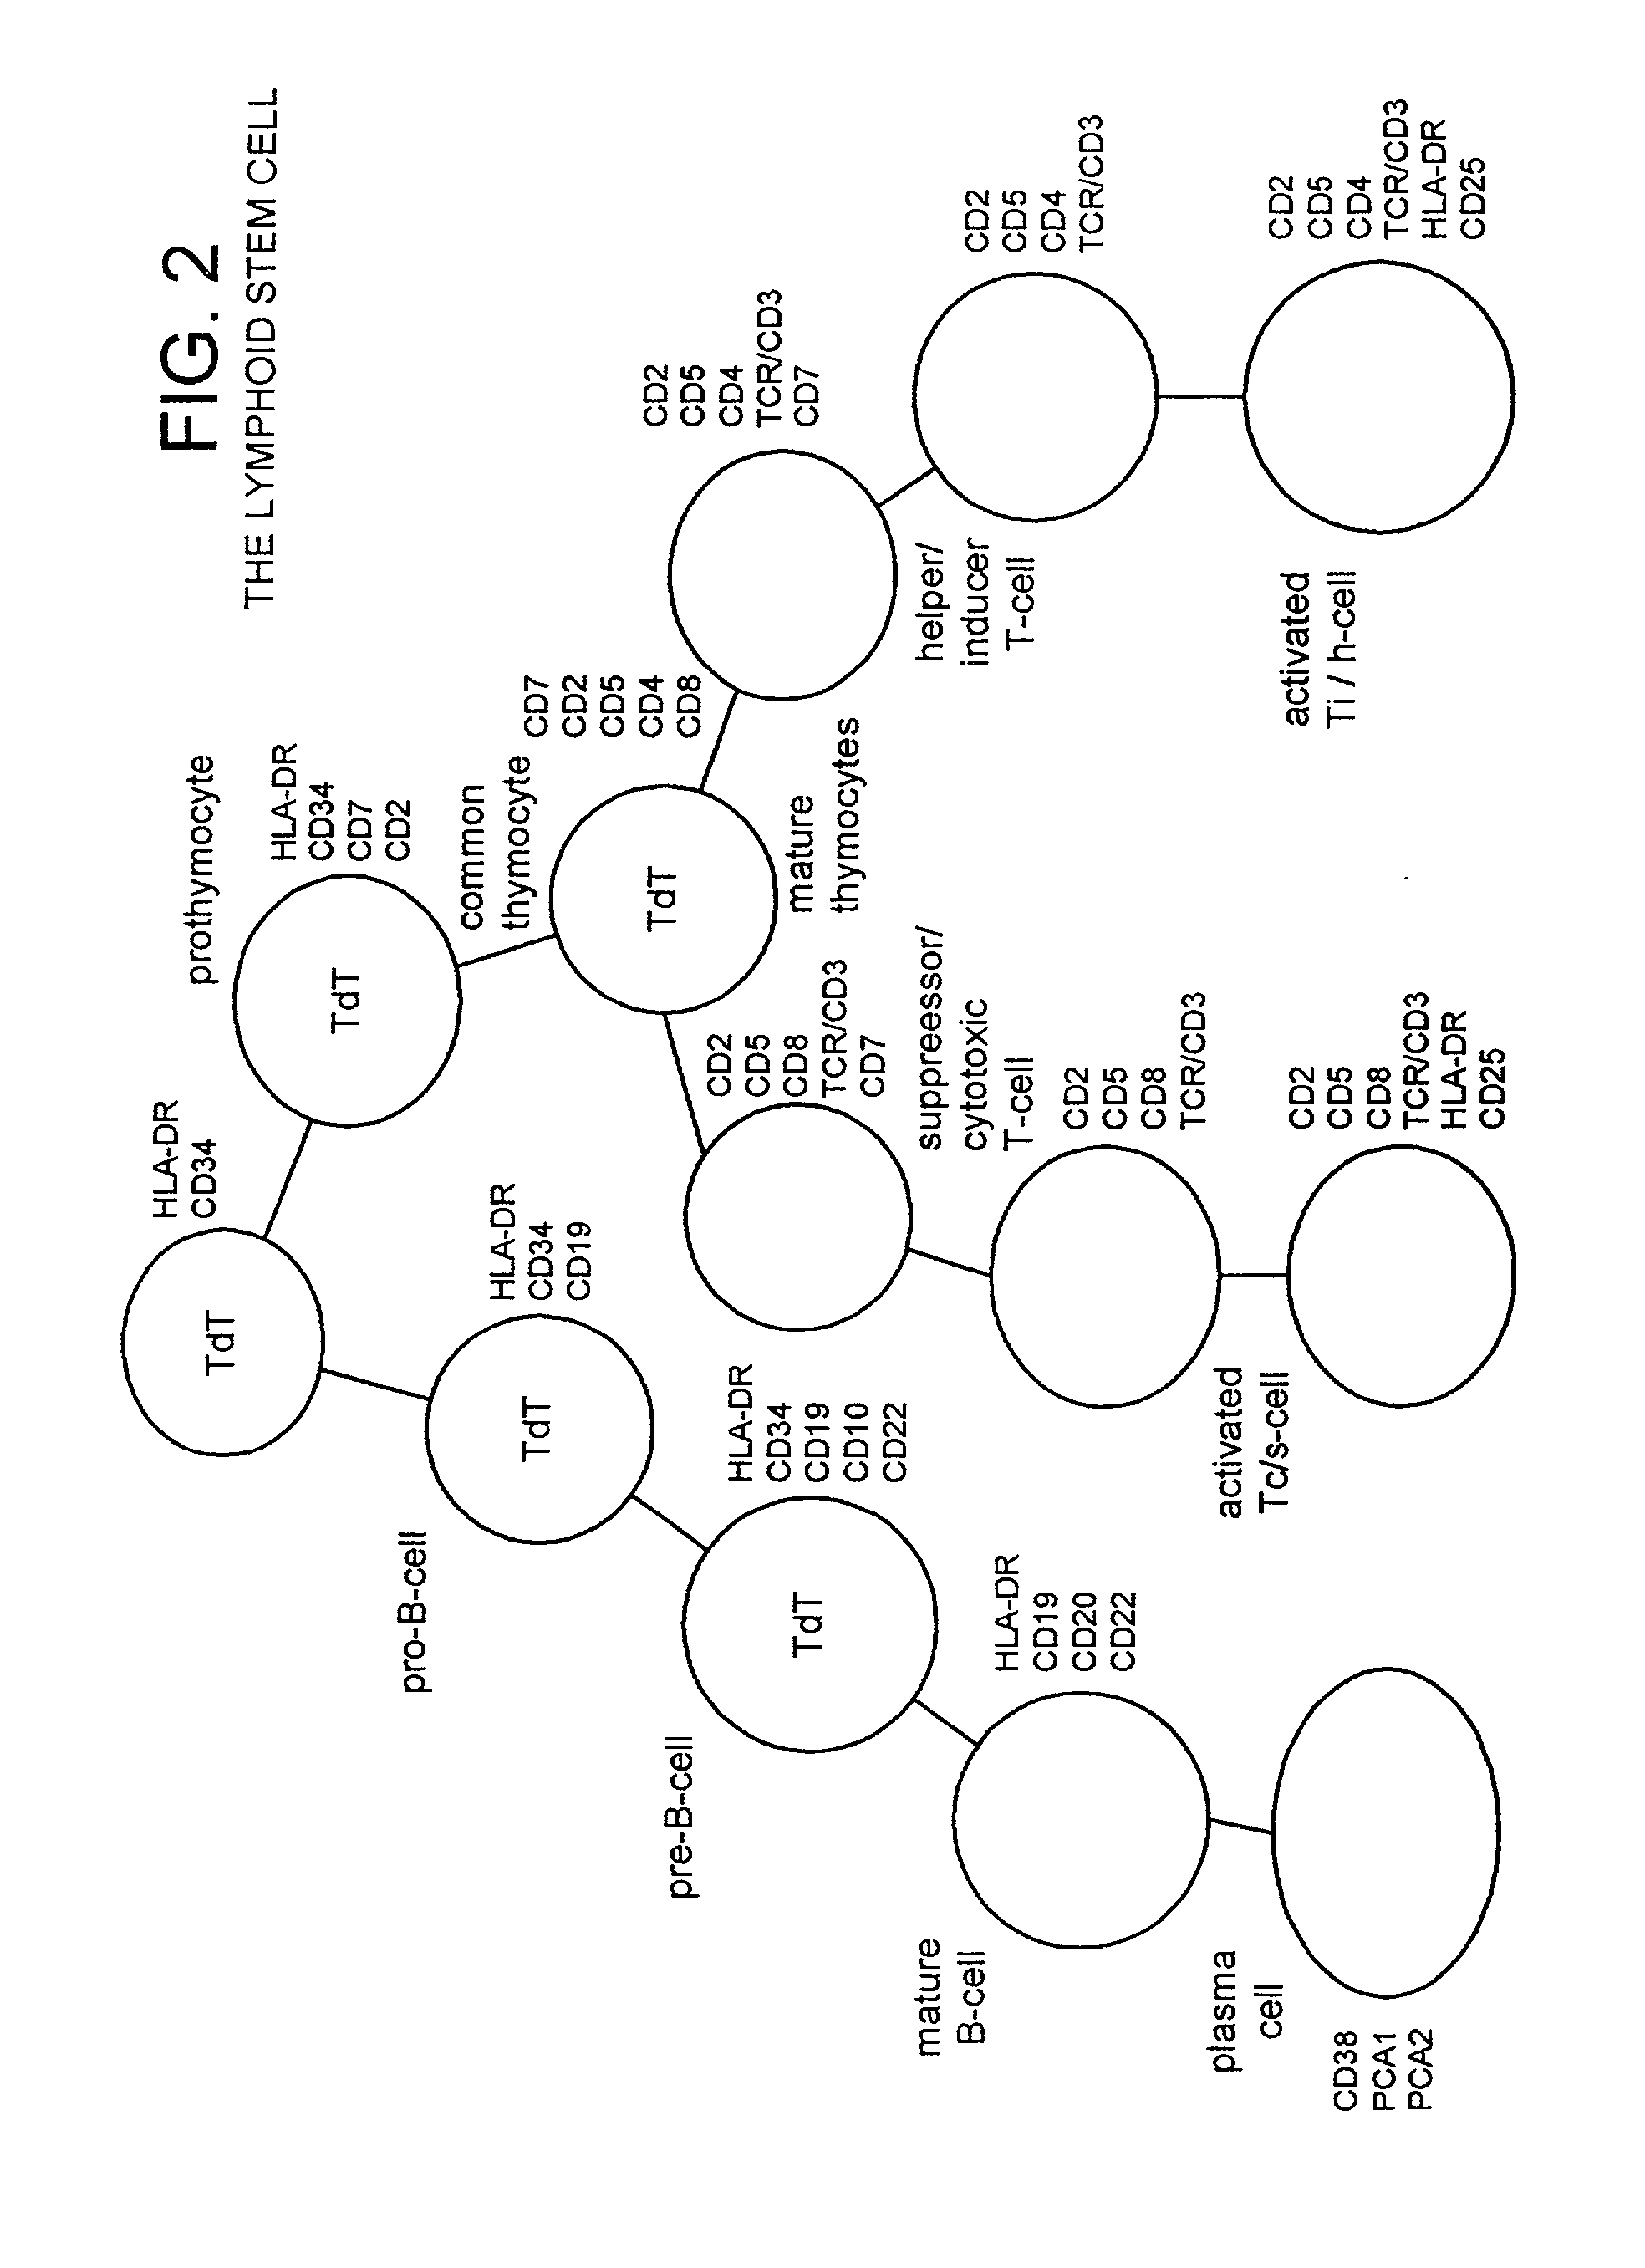 Method of preparing an undifferentiated cell